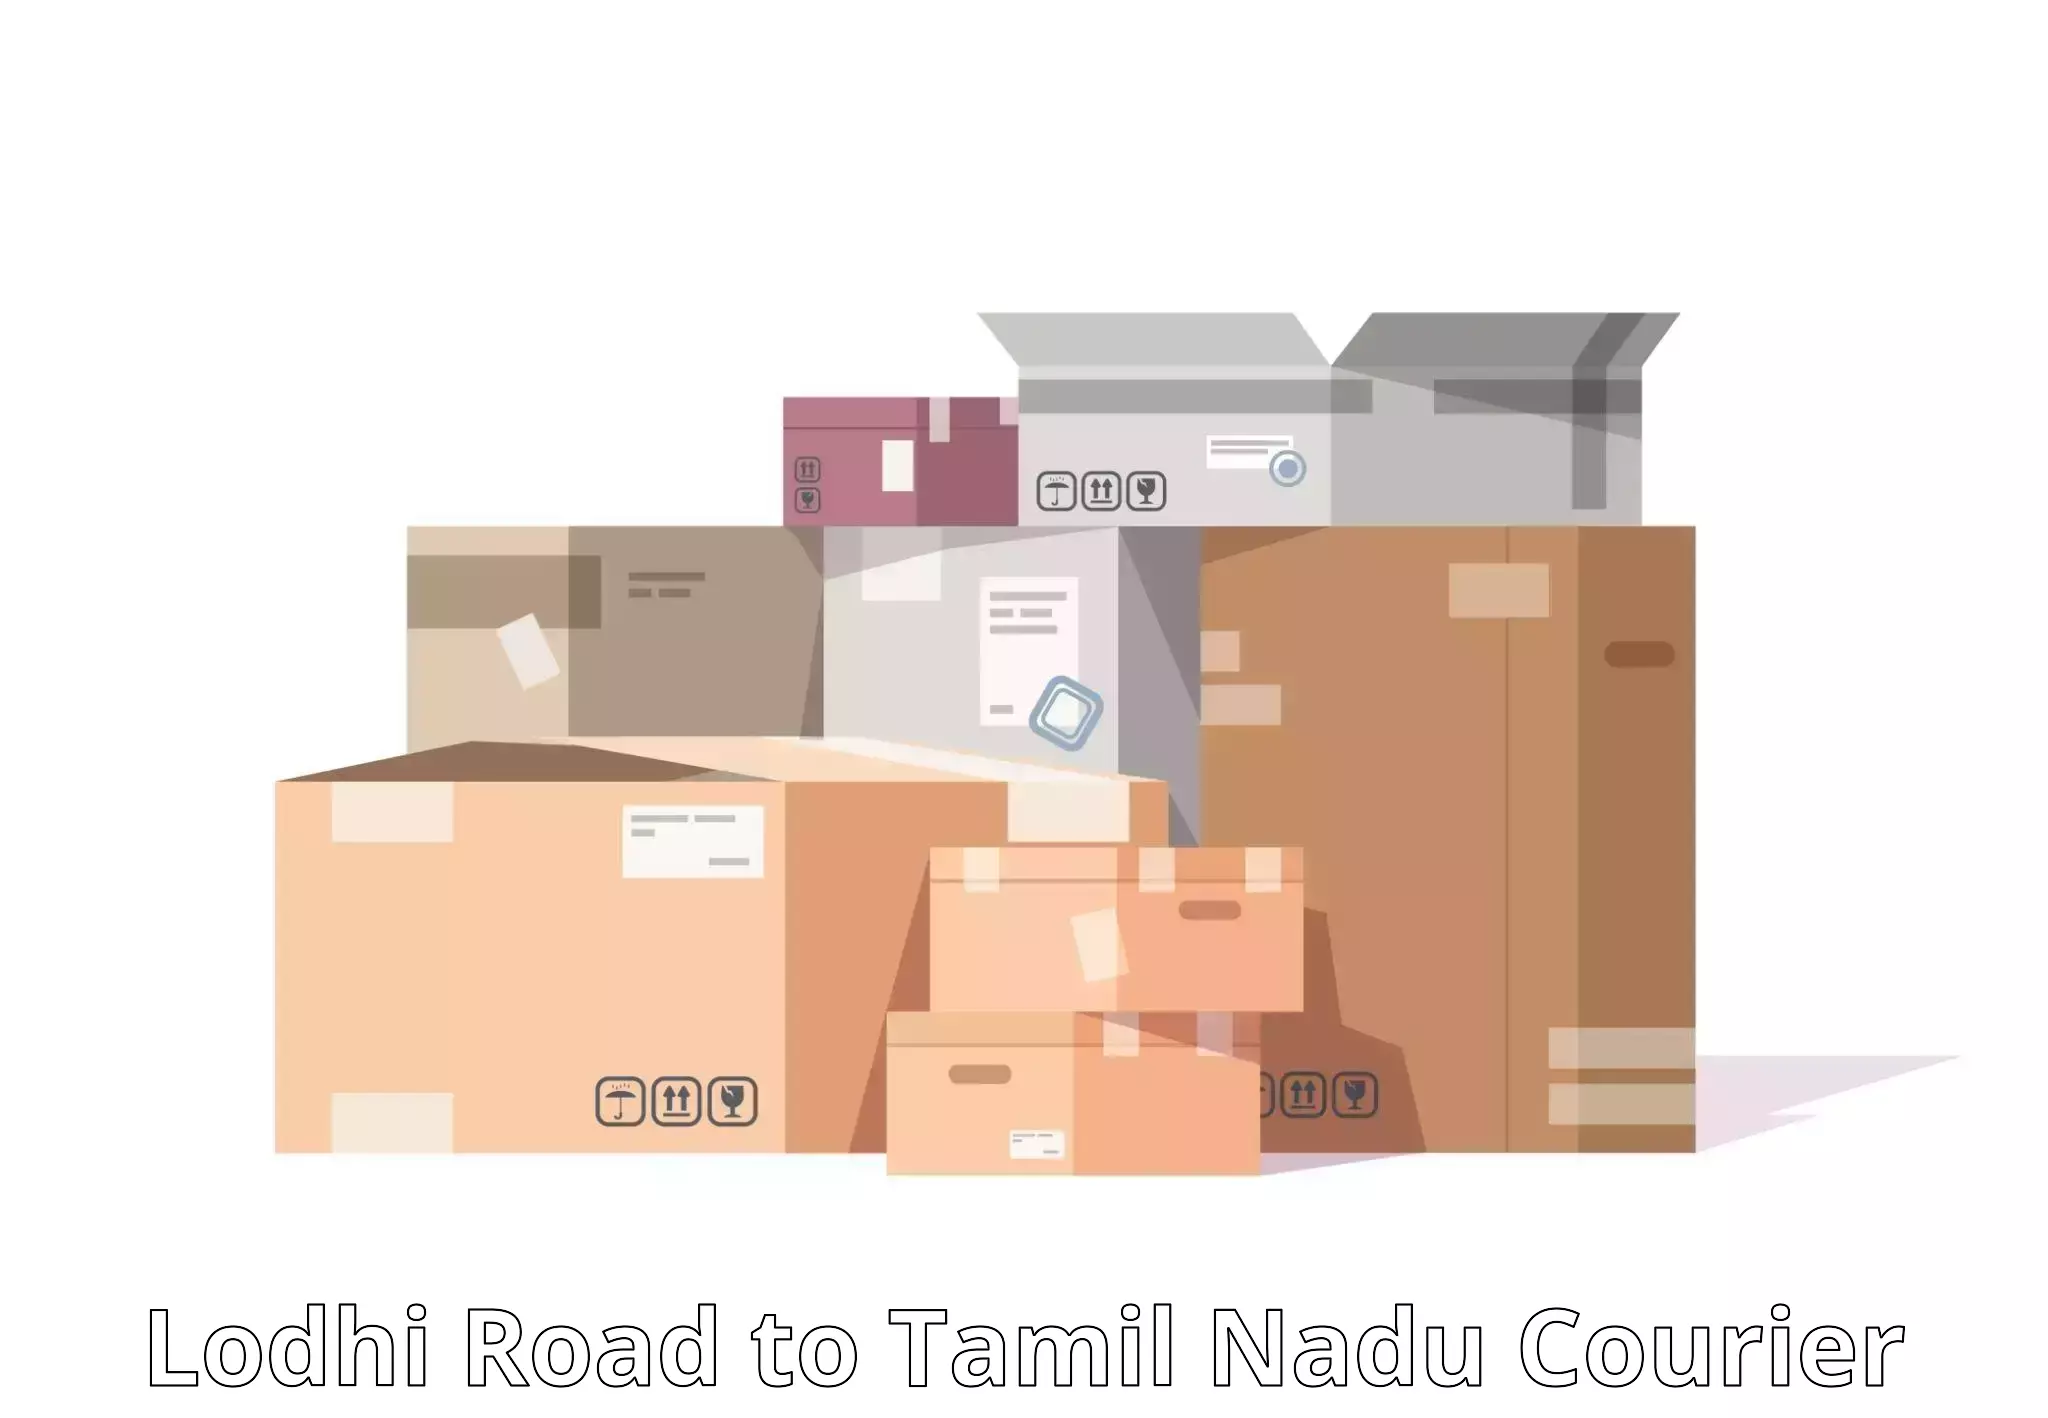 Nationwide courier service Lodhi Road to Neyveli